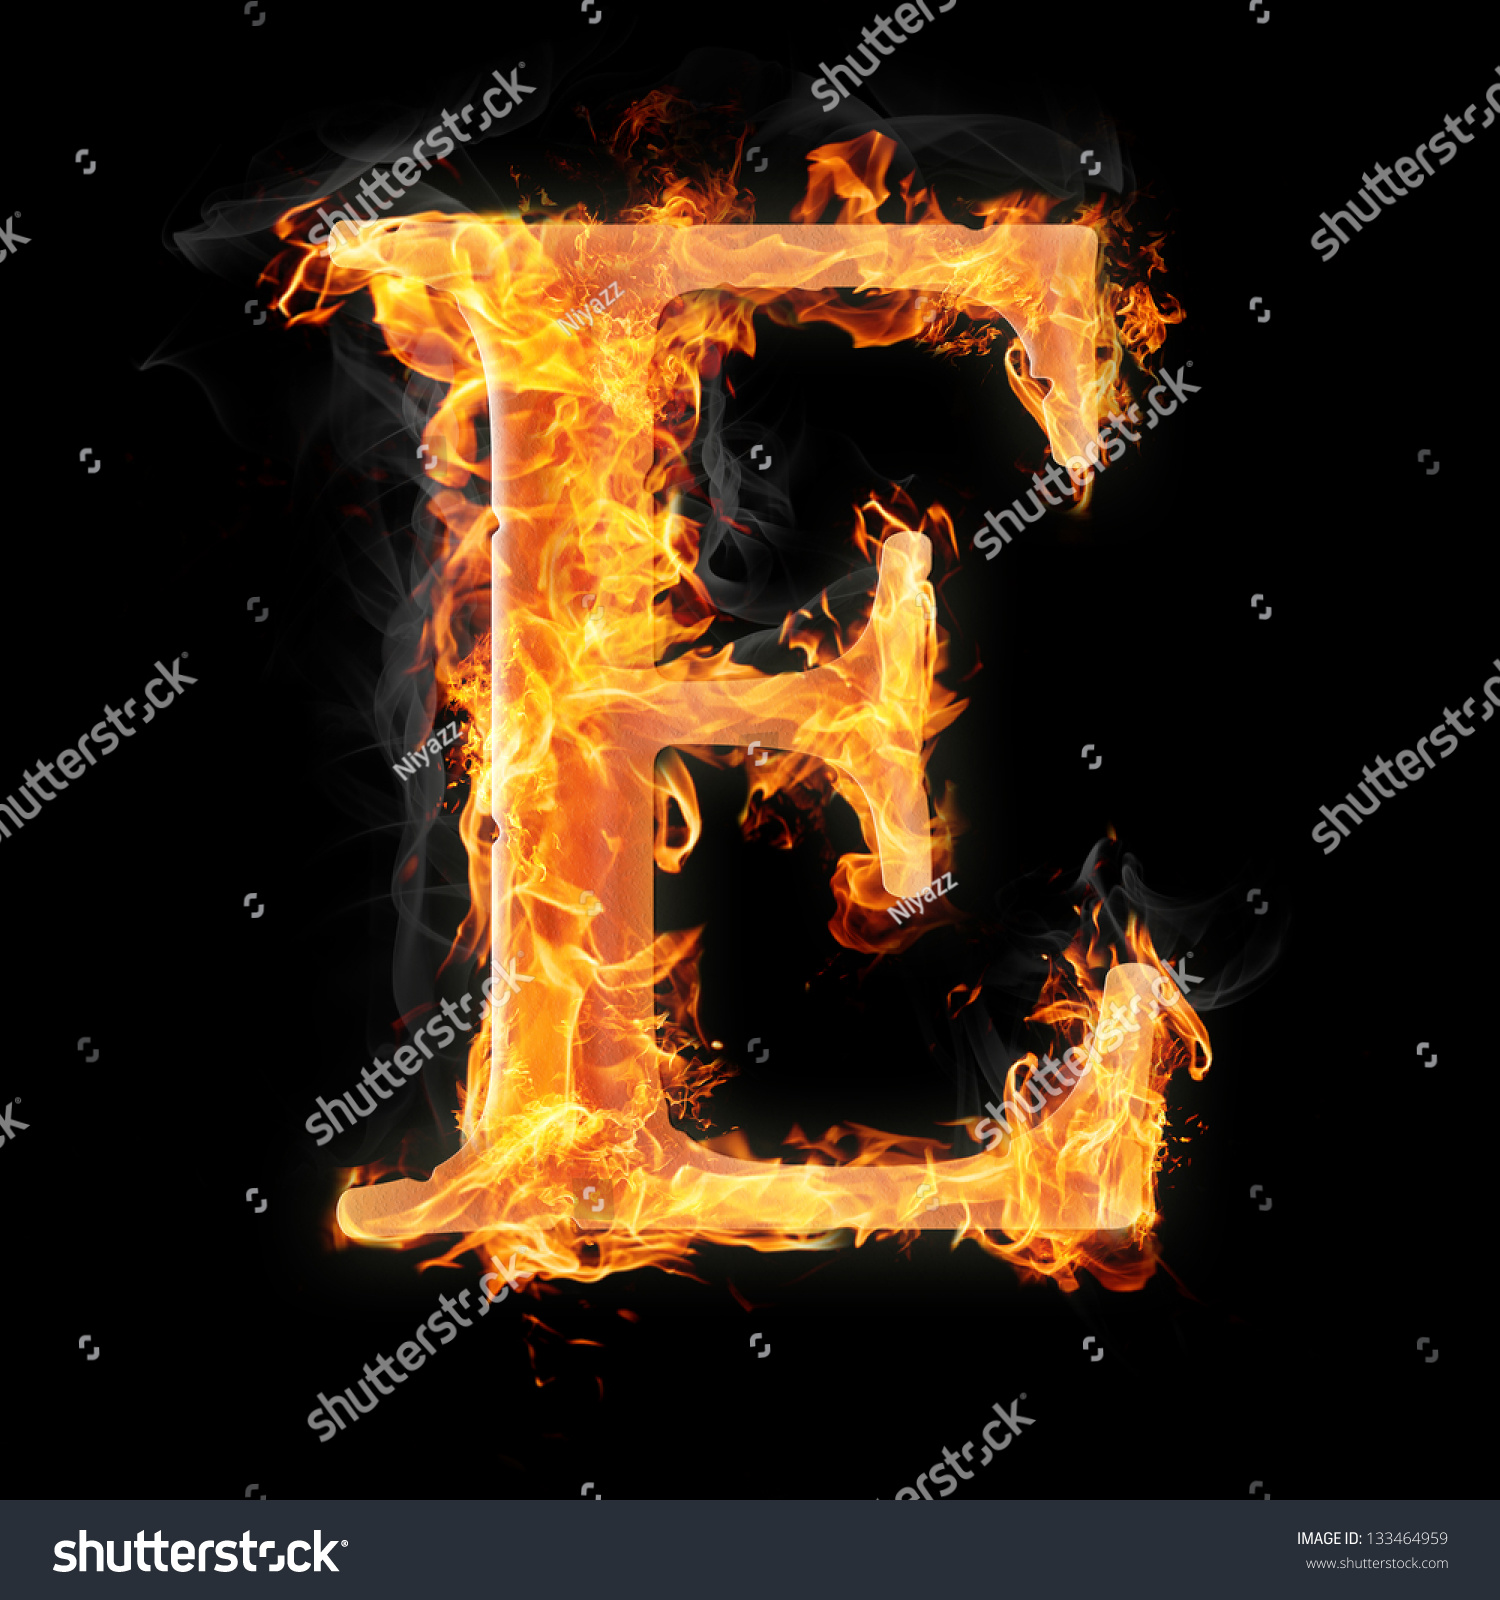 Letters And Symbols In Fire - Letter E. Stock Photo 133464959 ...